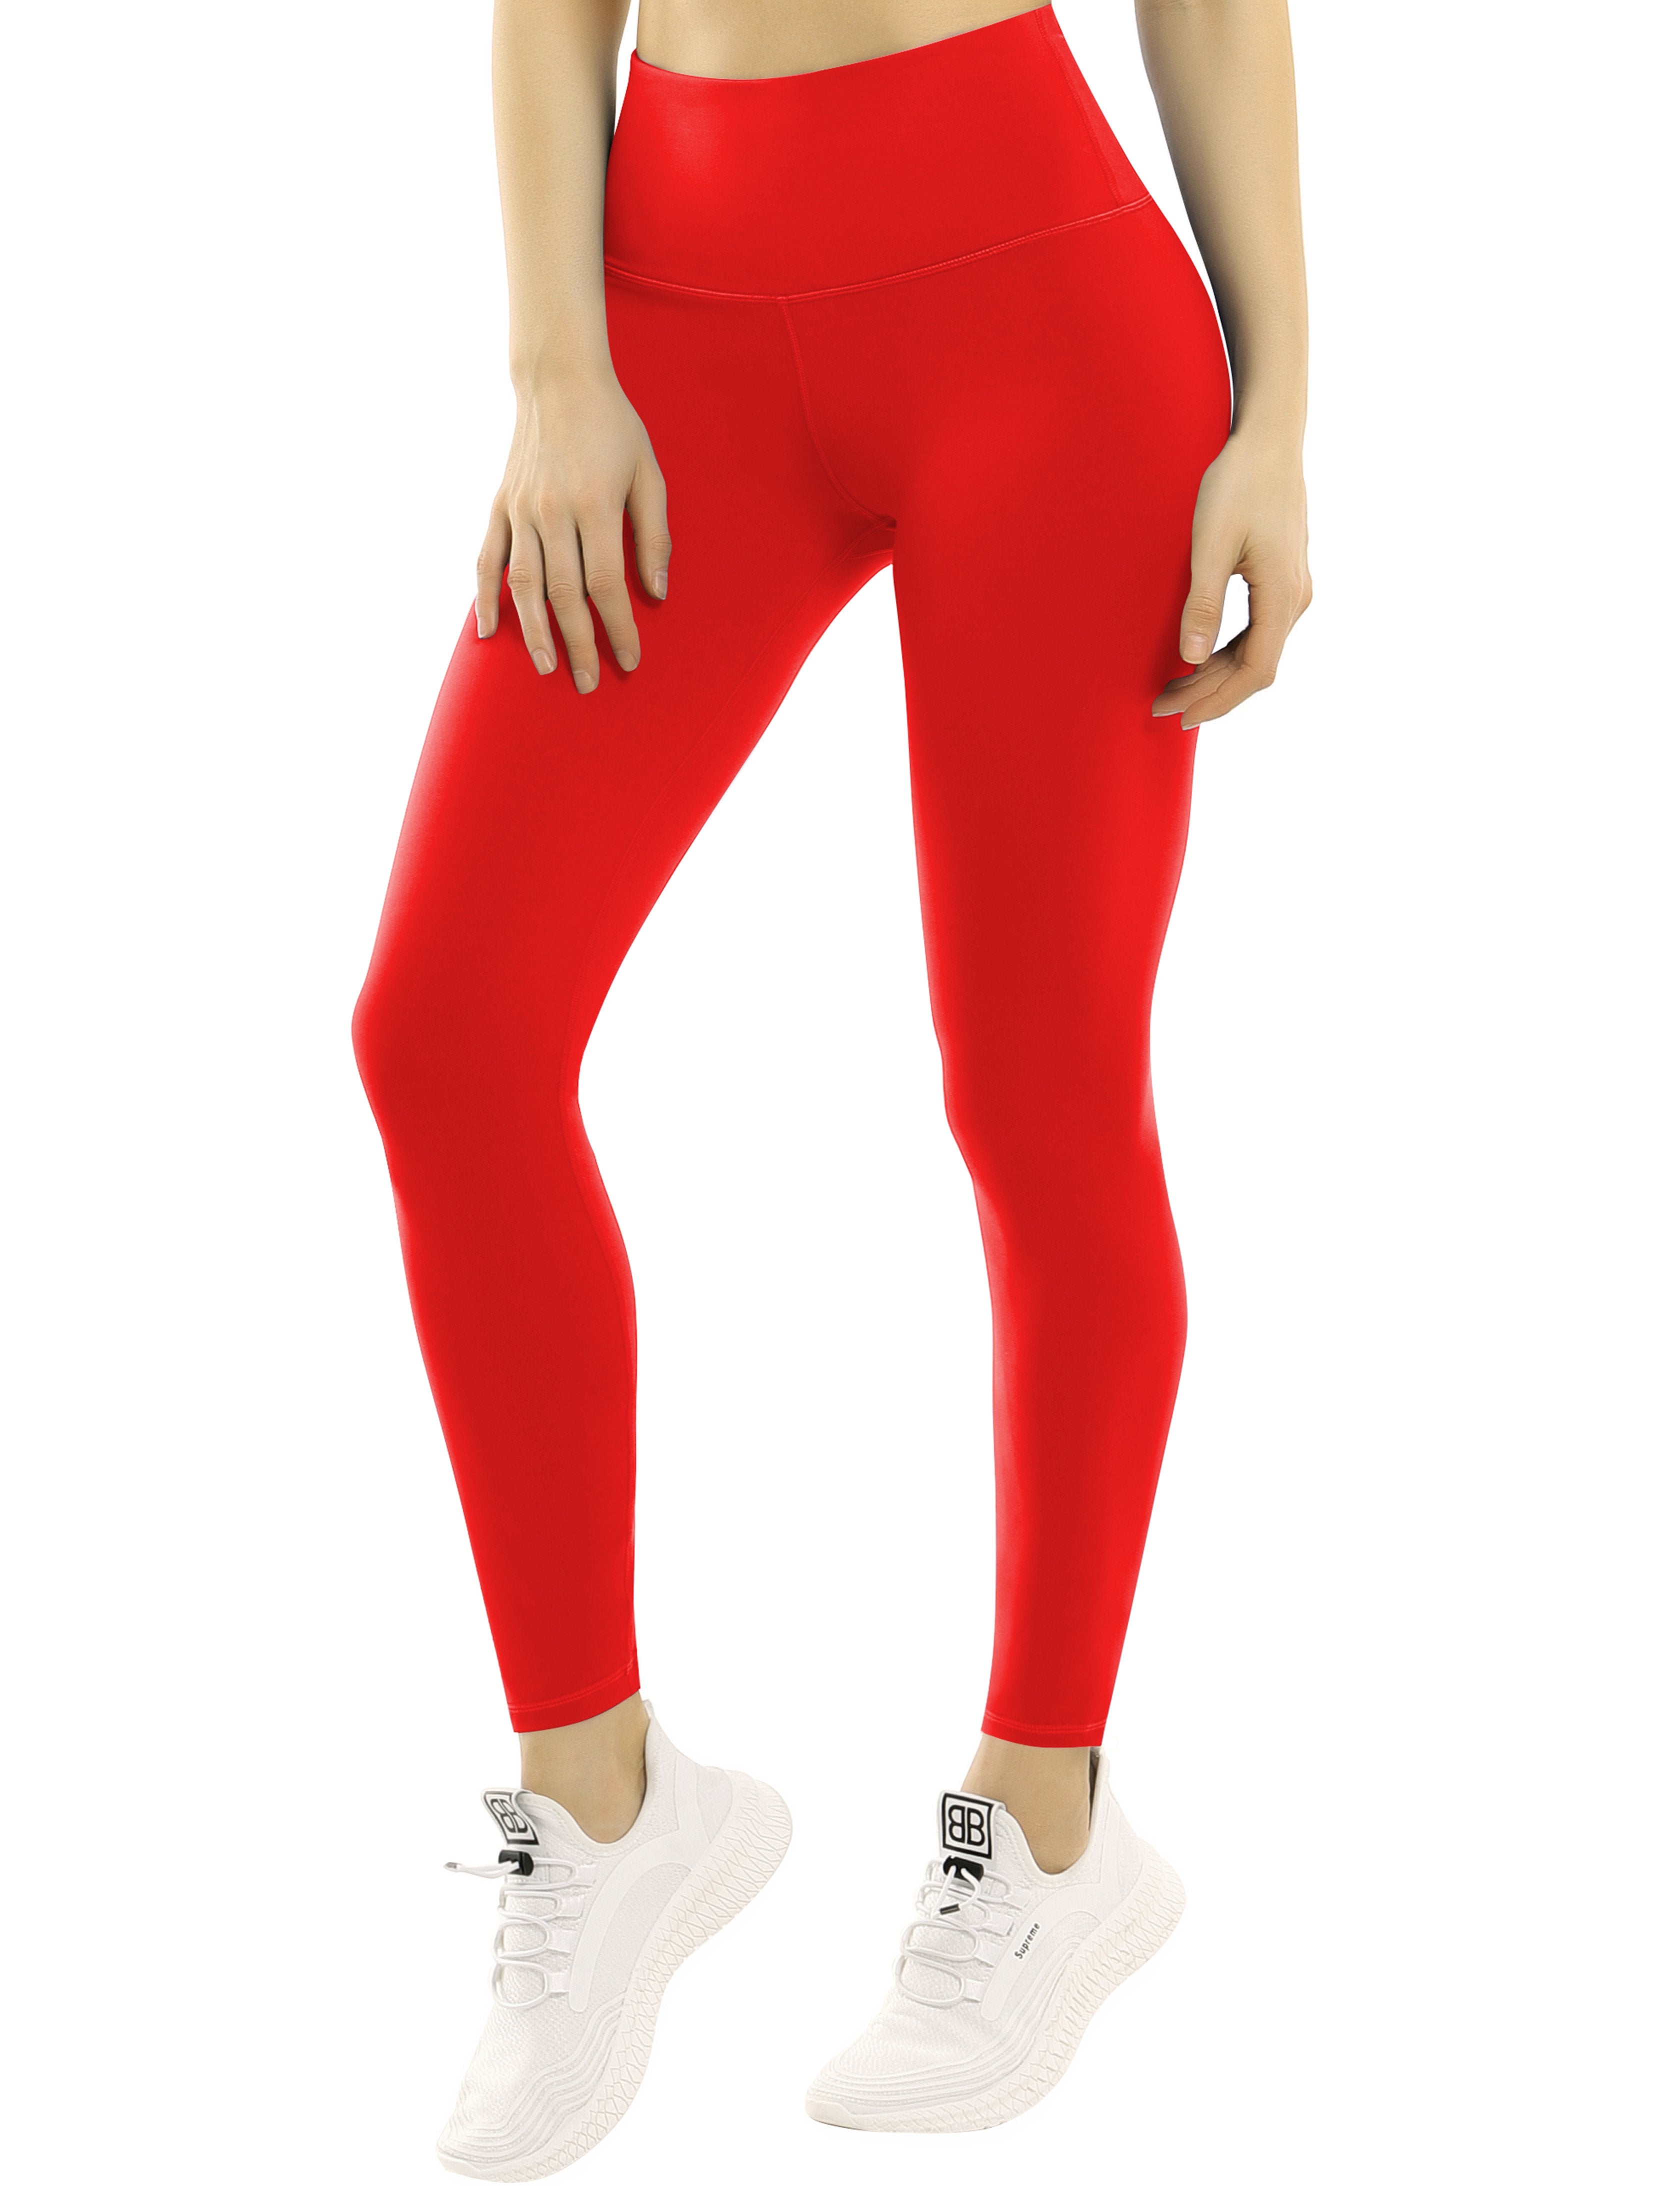 High Waist Golf Pants scarlet 75%Nylon/25%Spandex Fabric doesn't attract lint easily 4-way stretch No see-through Moisture-wicking Tummy control Inner pocket Four lengths